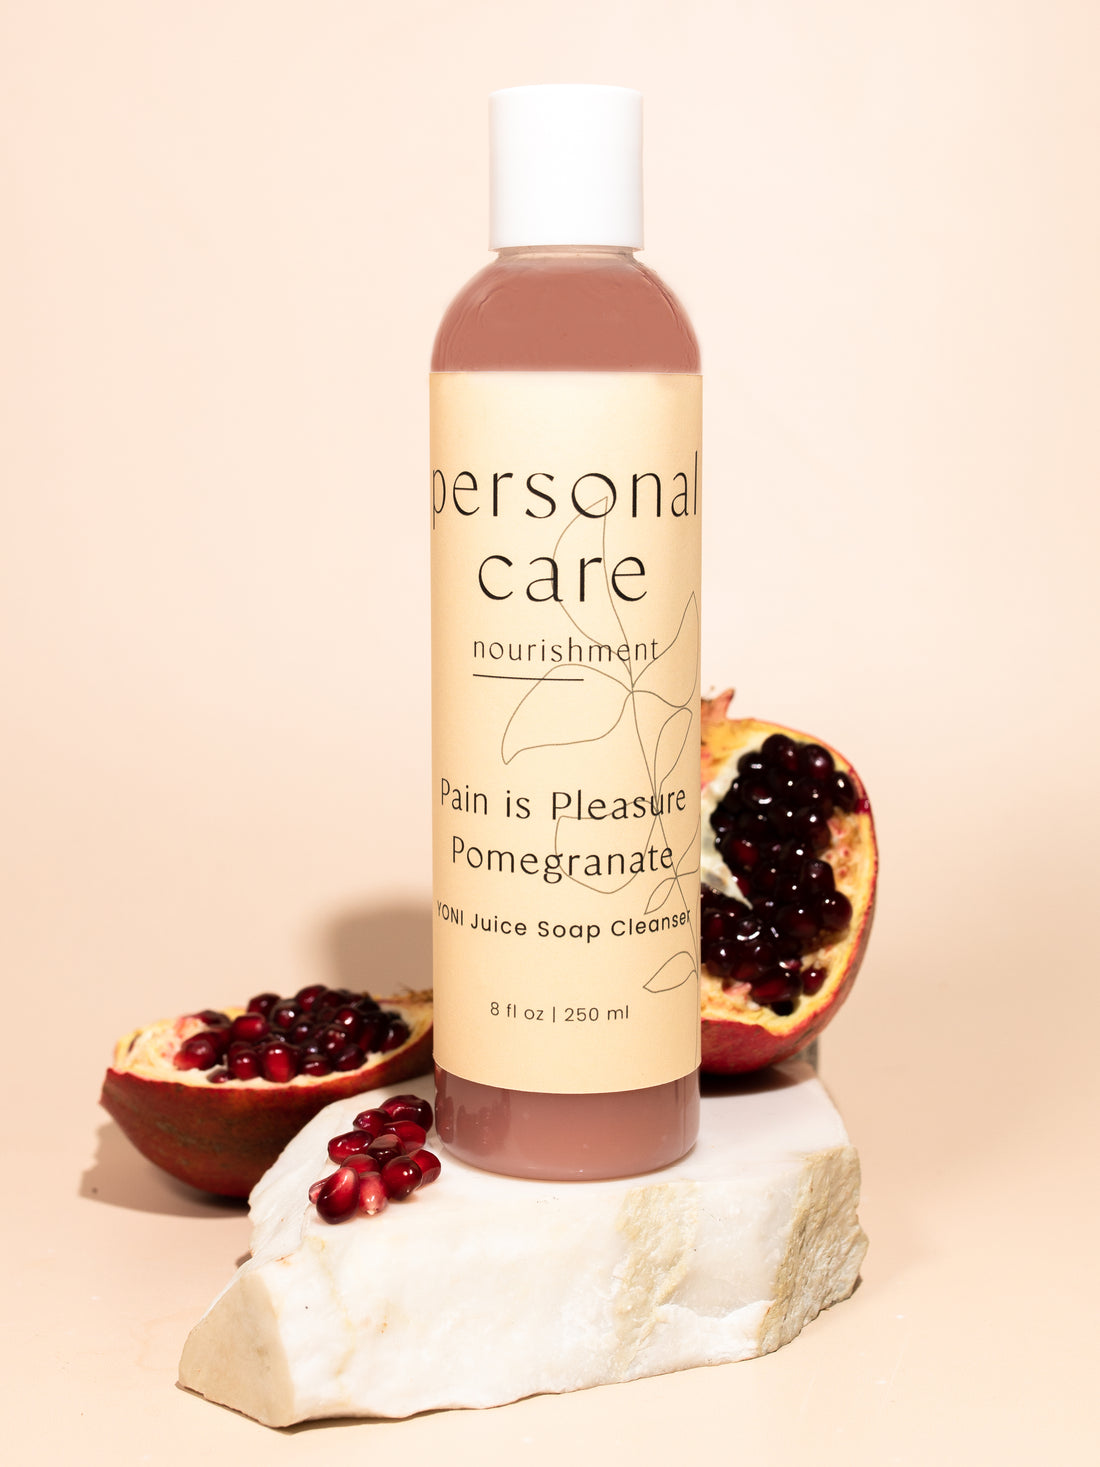 Pacing Pomegranate - YONI Juice Soap Cleanser